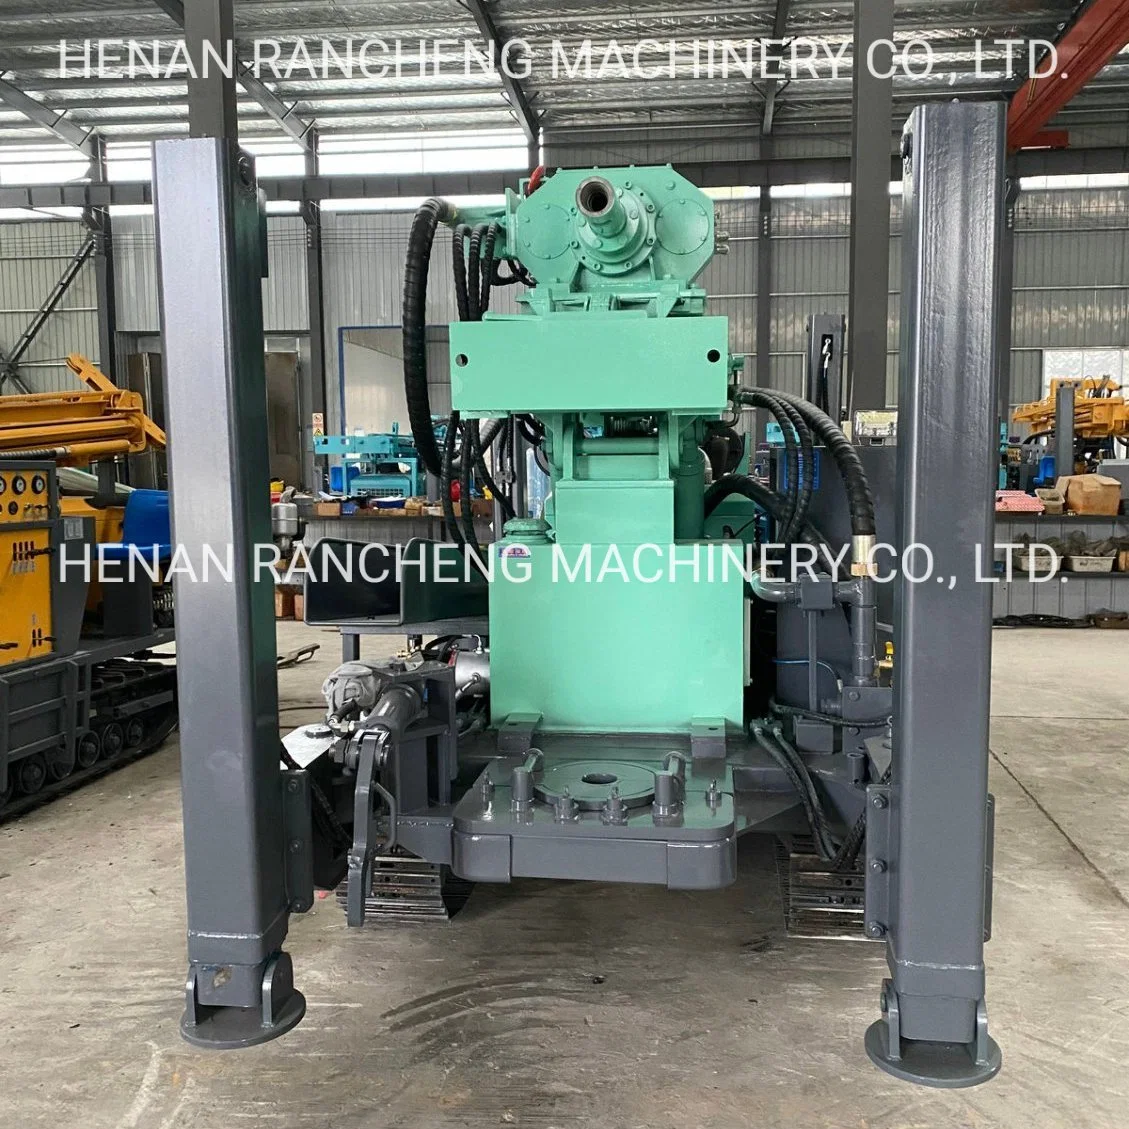 Fast Drilling 300m Borehole Drilling Machine/Steel Crawler Mounted Water Well Drilling Rig/Water Drilling Machine with 85kw Diesel Engine